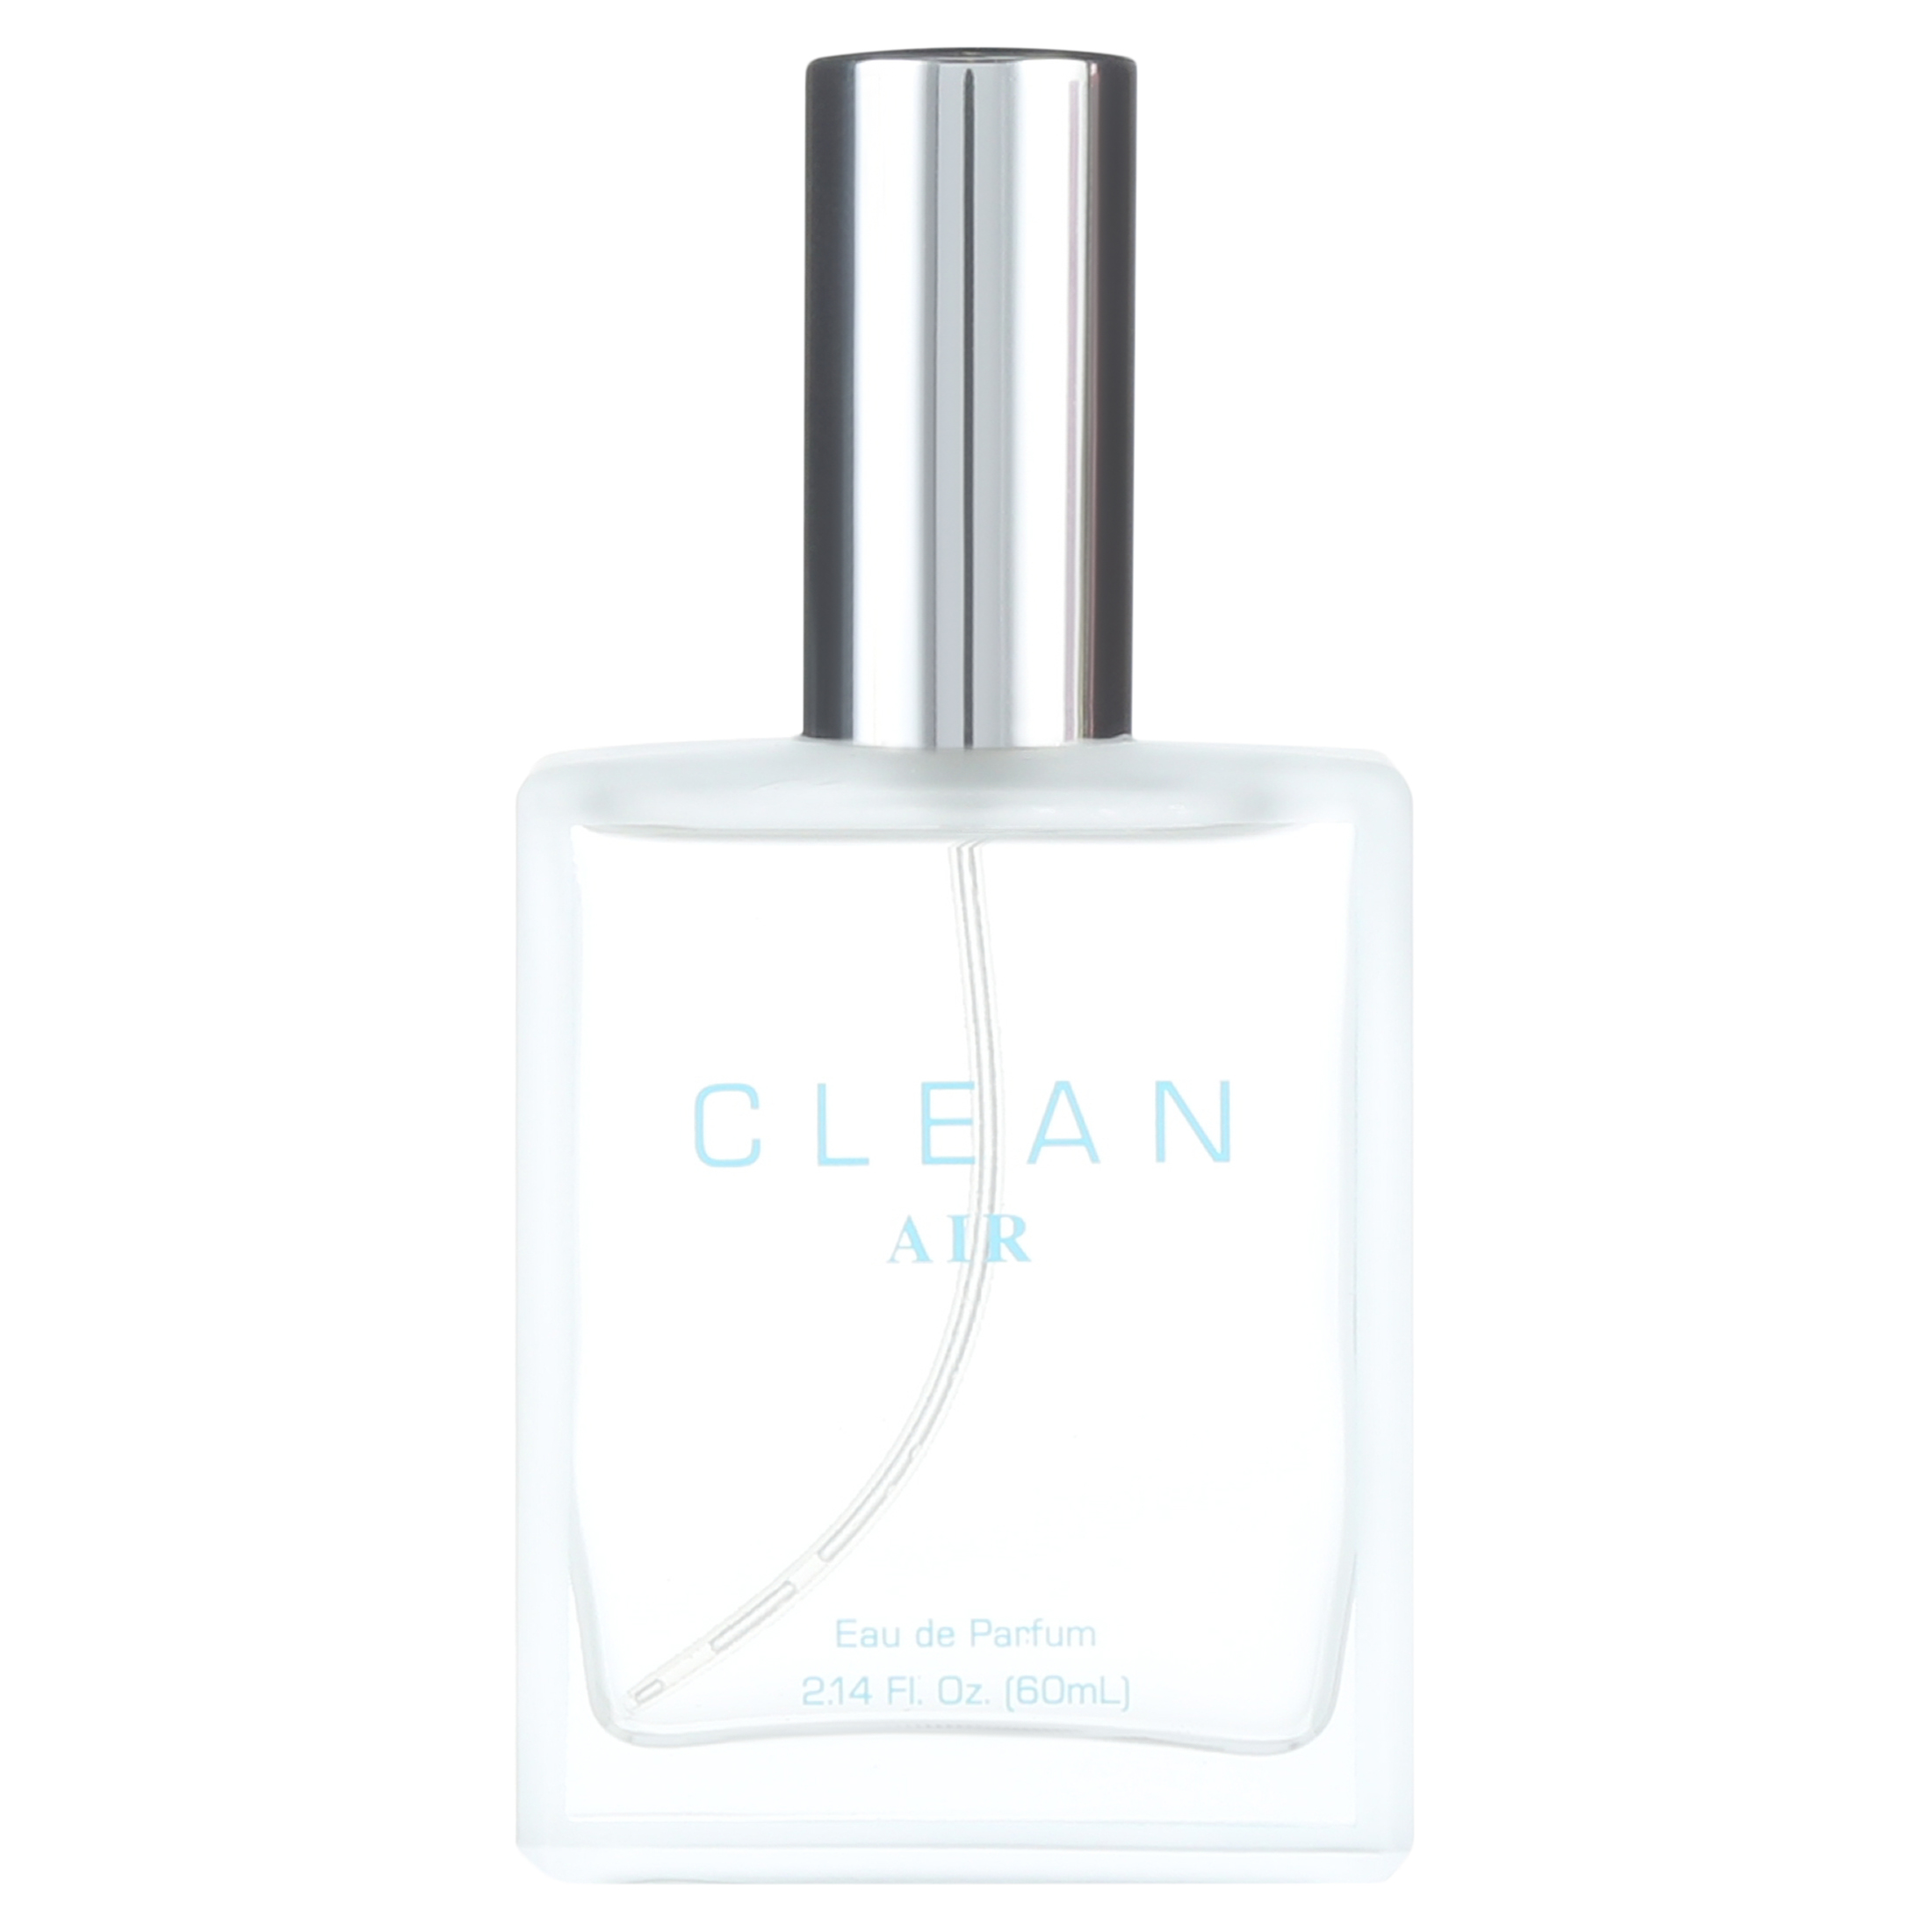 Air by Clean for Women - 2.14 oz EDP Spray - image 3 of 6